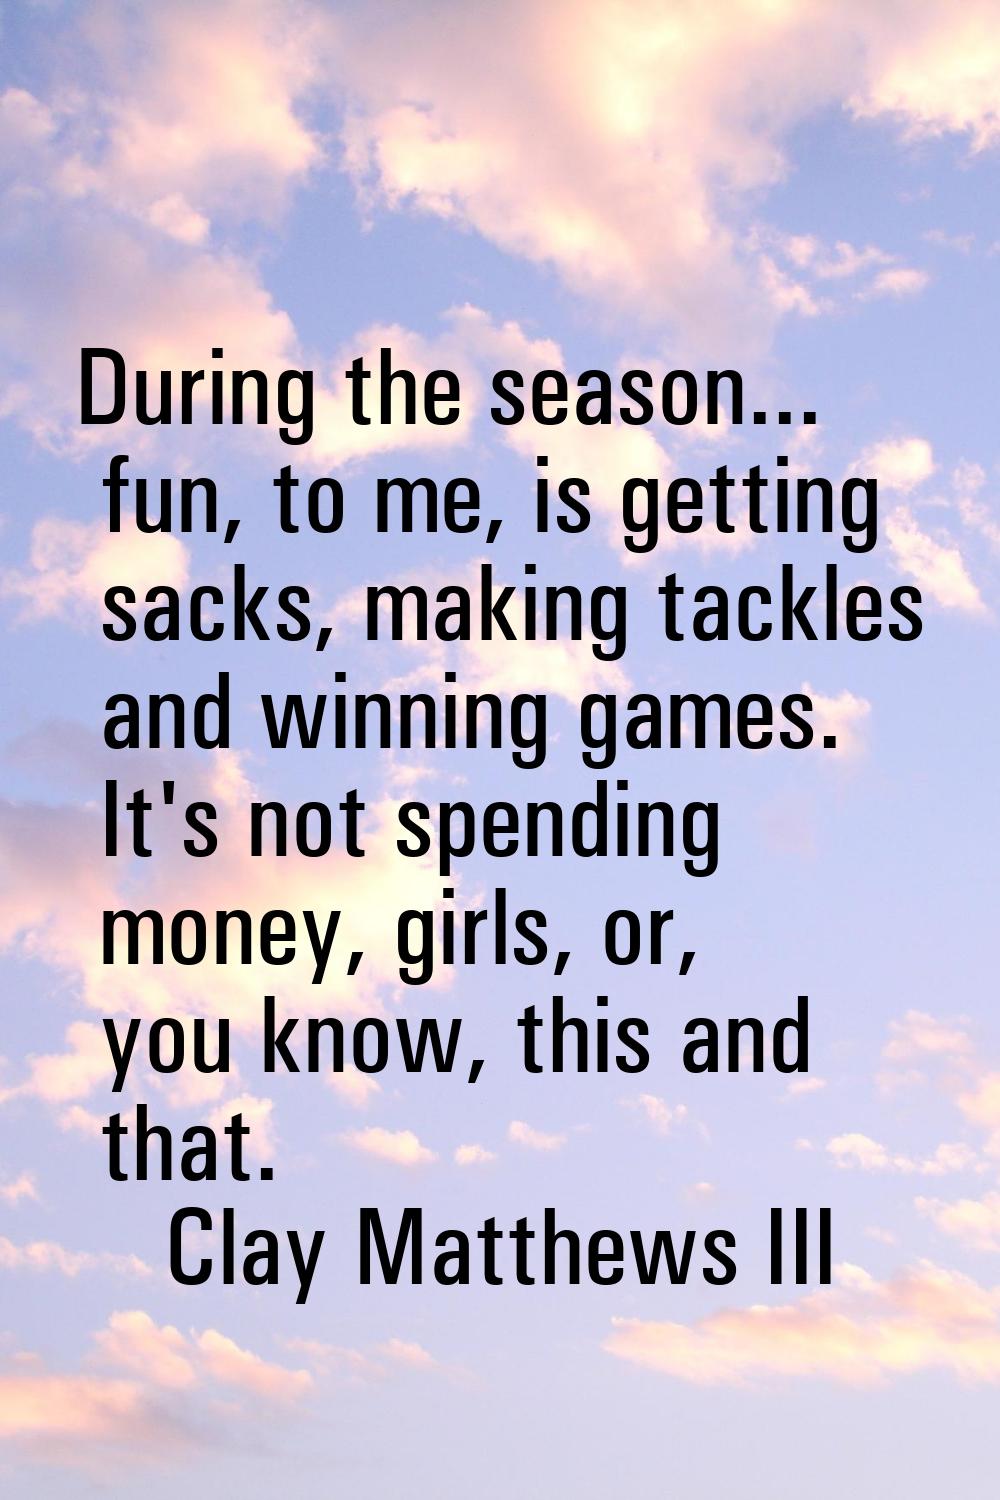 During the season... fun, to me, is getting sacks, making tackles and winning games. It's not spend